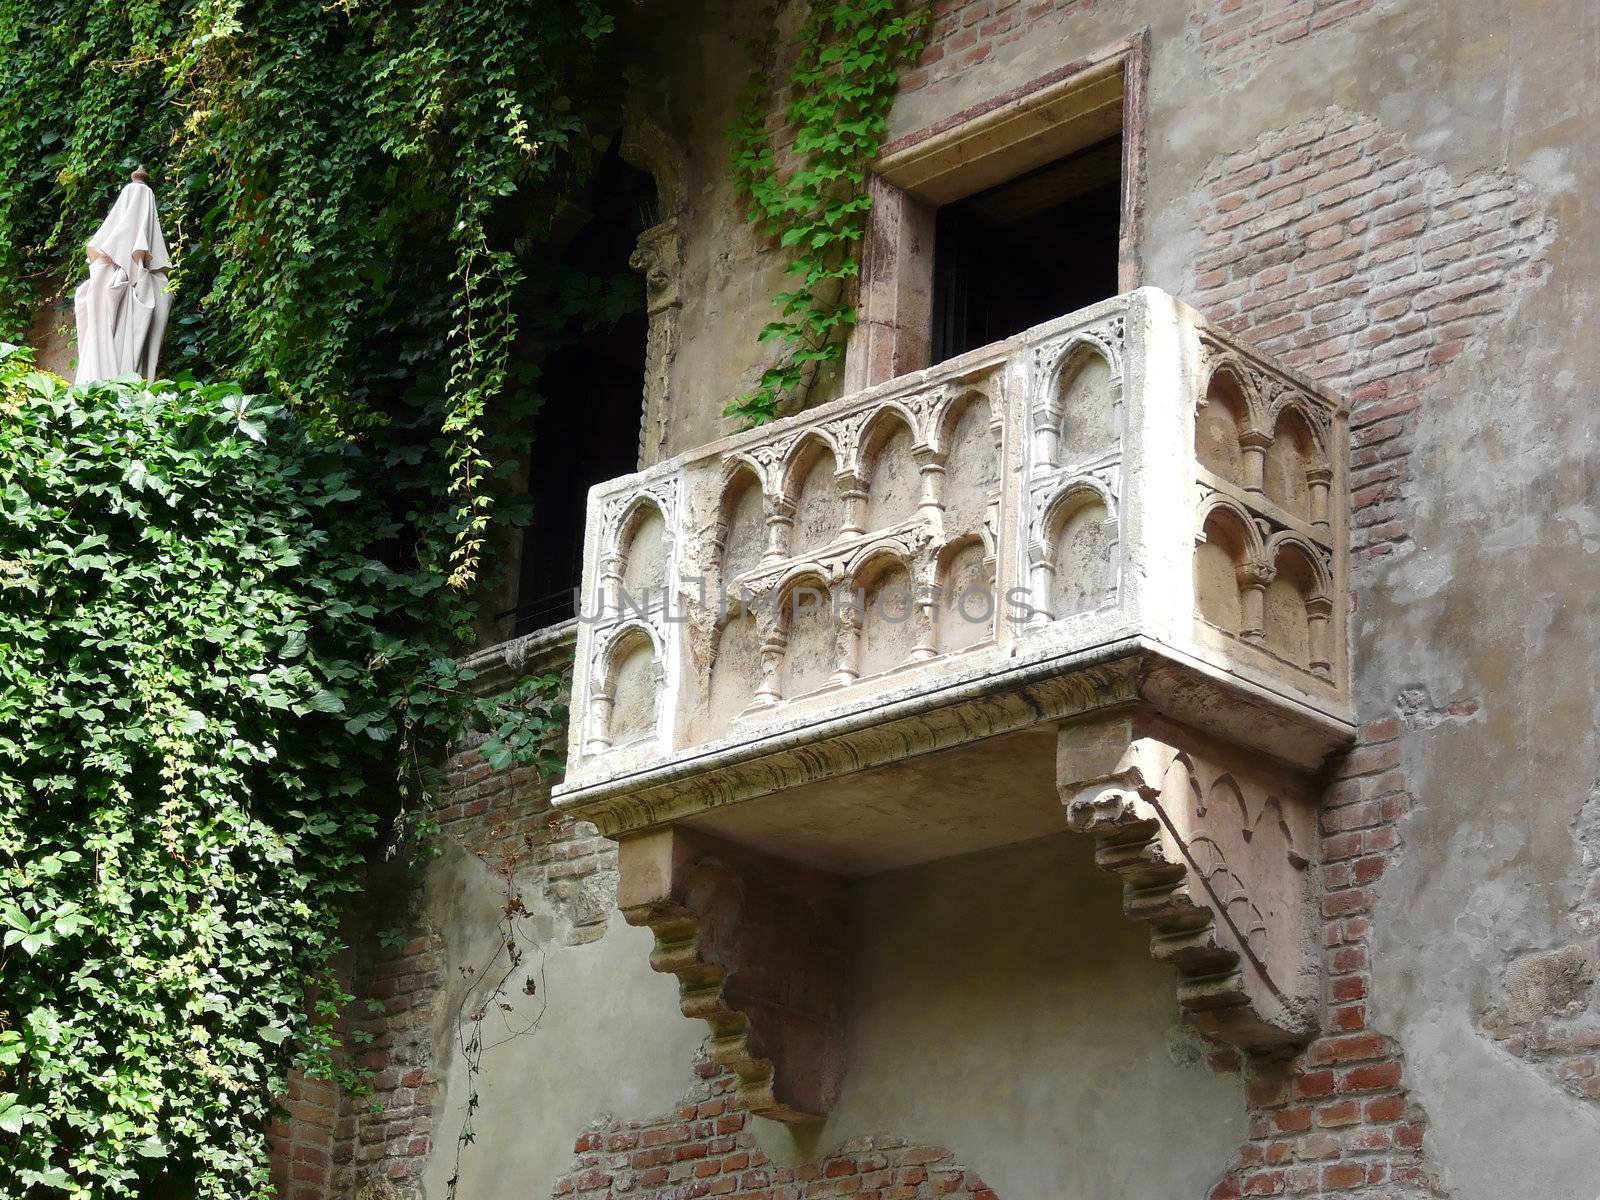 The famous balcony of Romeo and Juliet in Verona, Italy